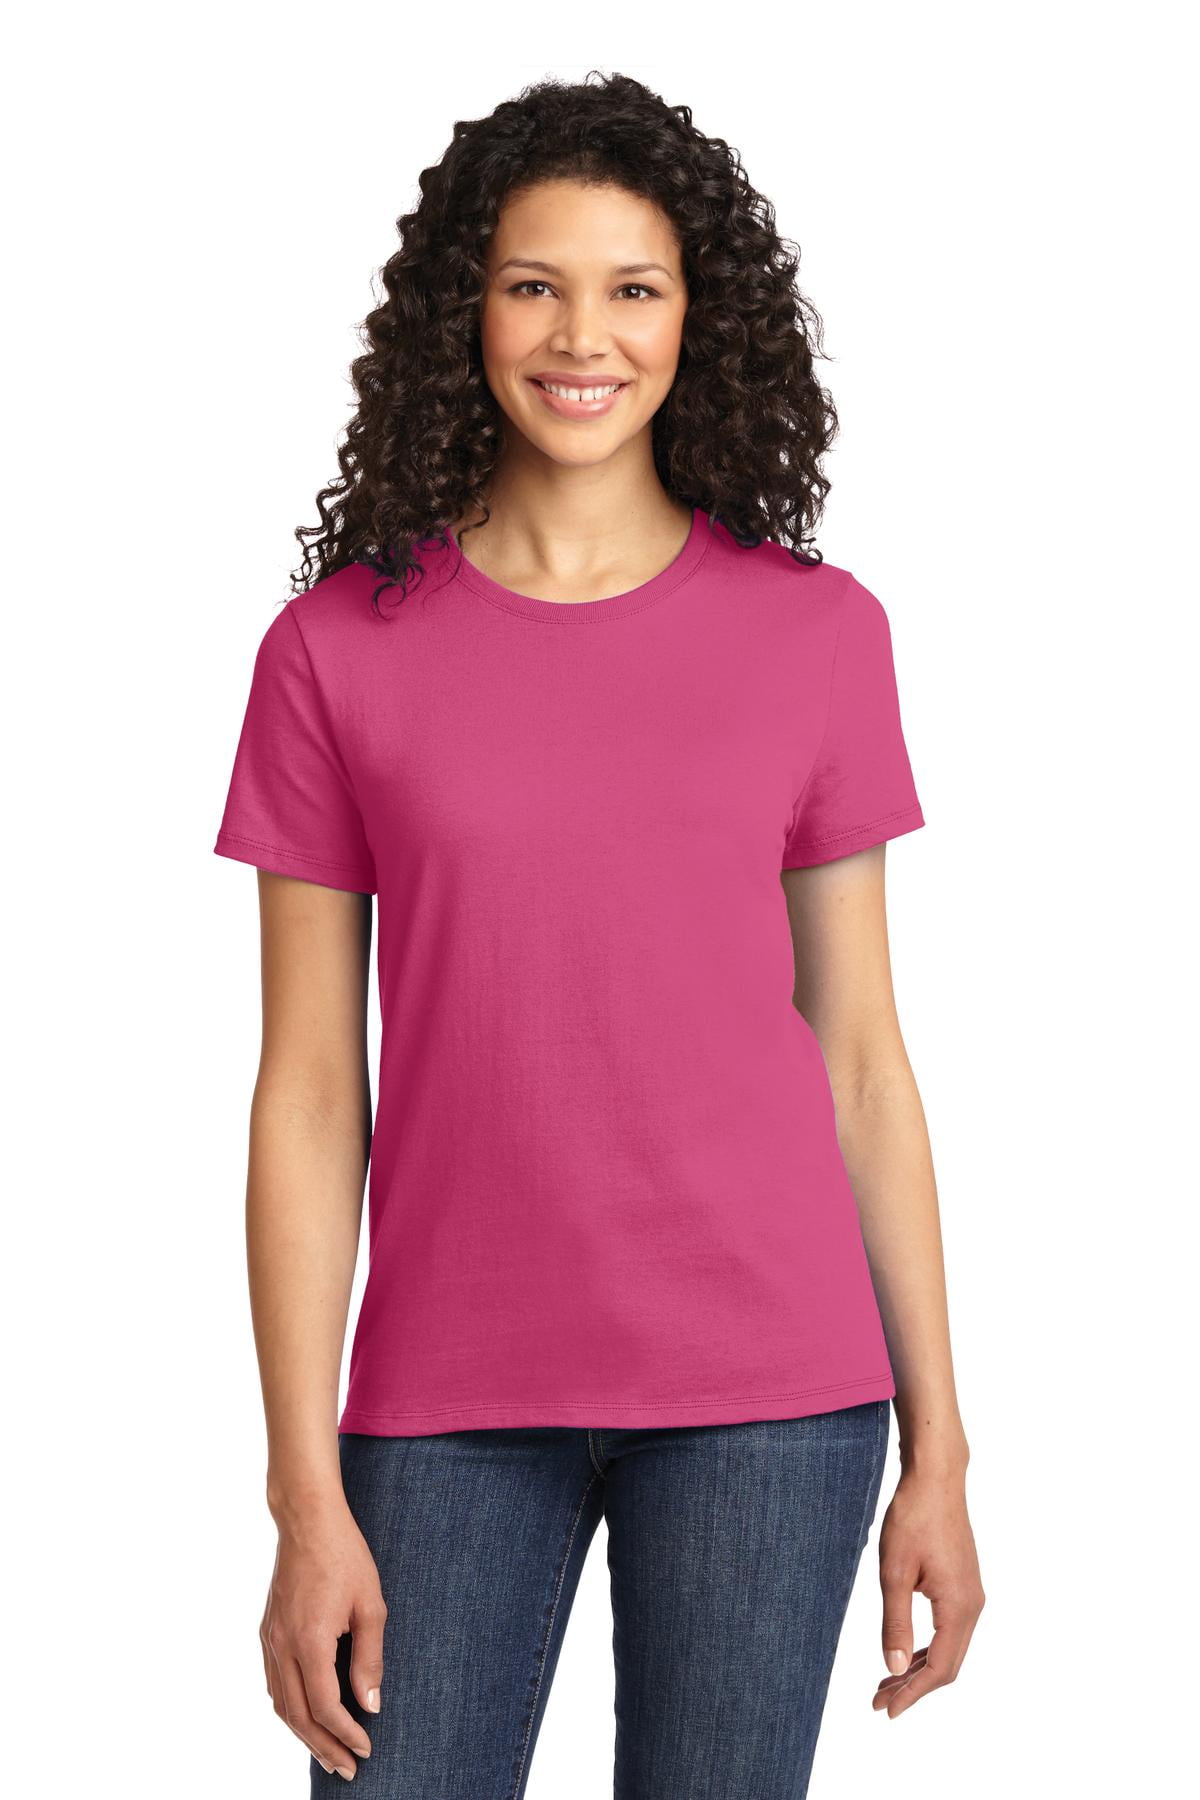 Top of the World NCAA Womens Premium Triblend Dolman Team Color Tee